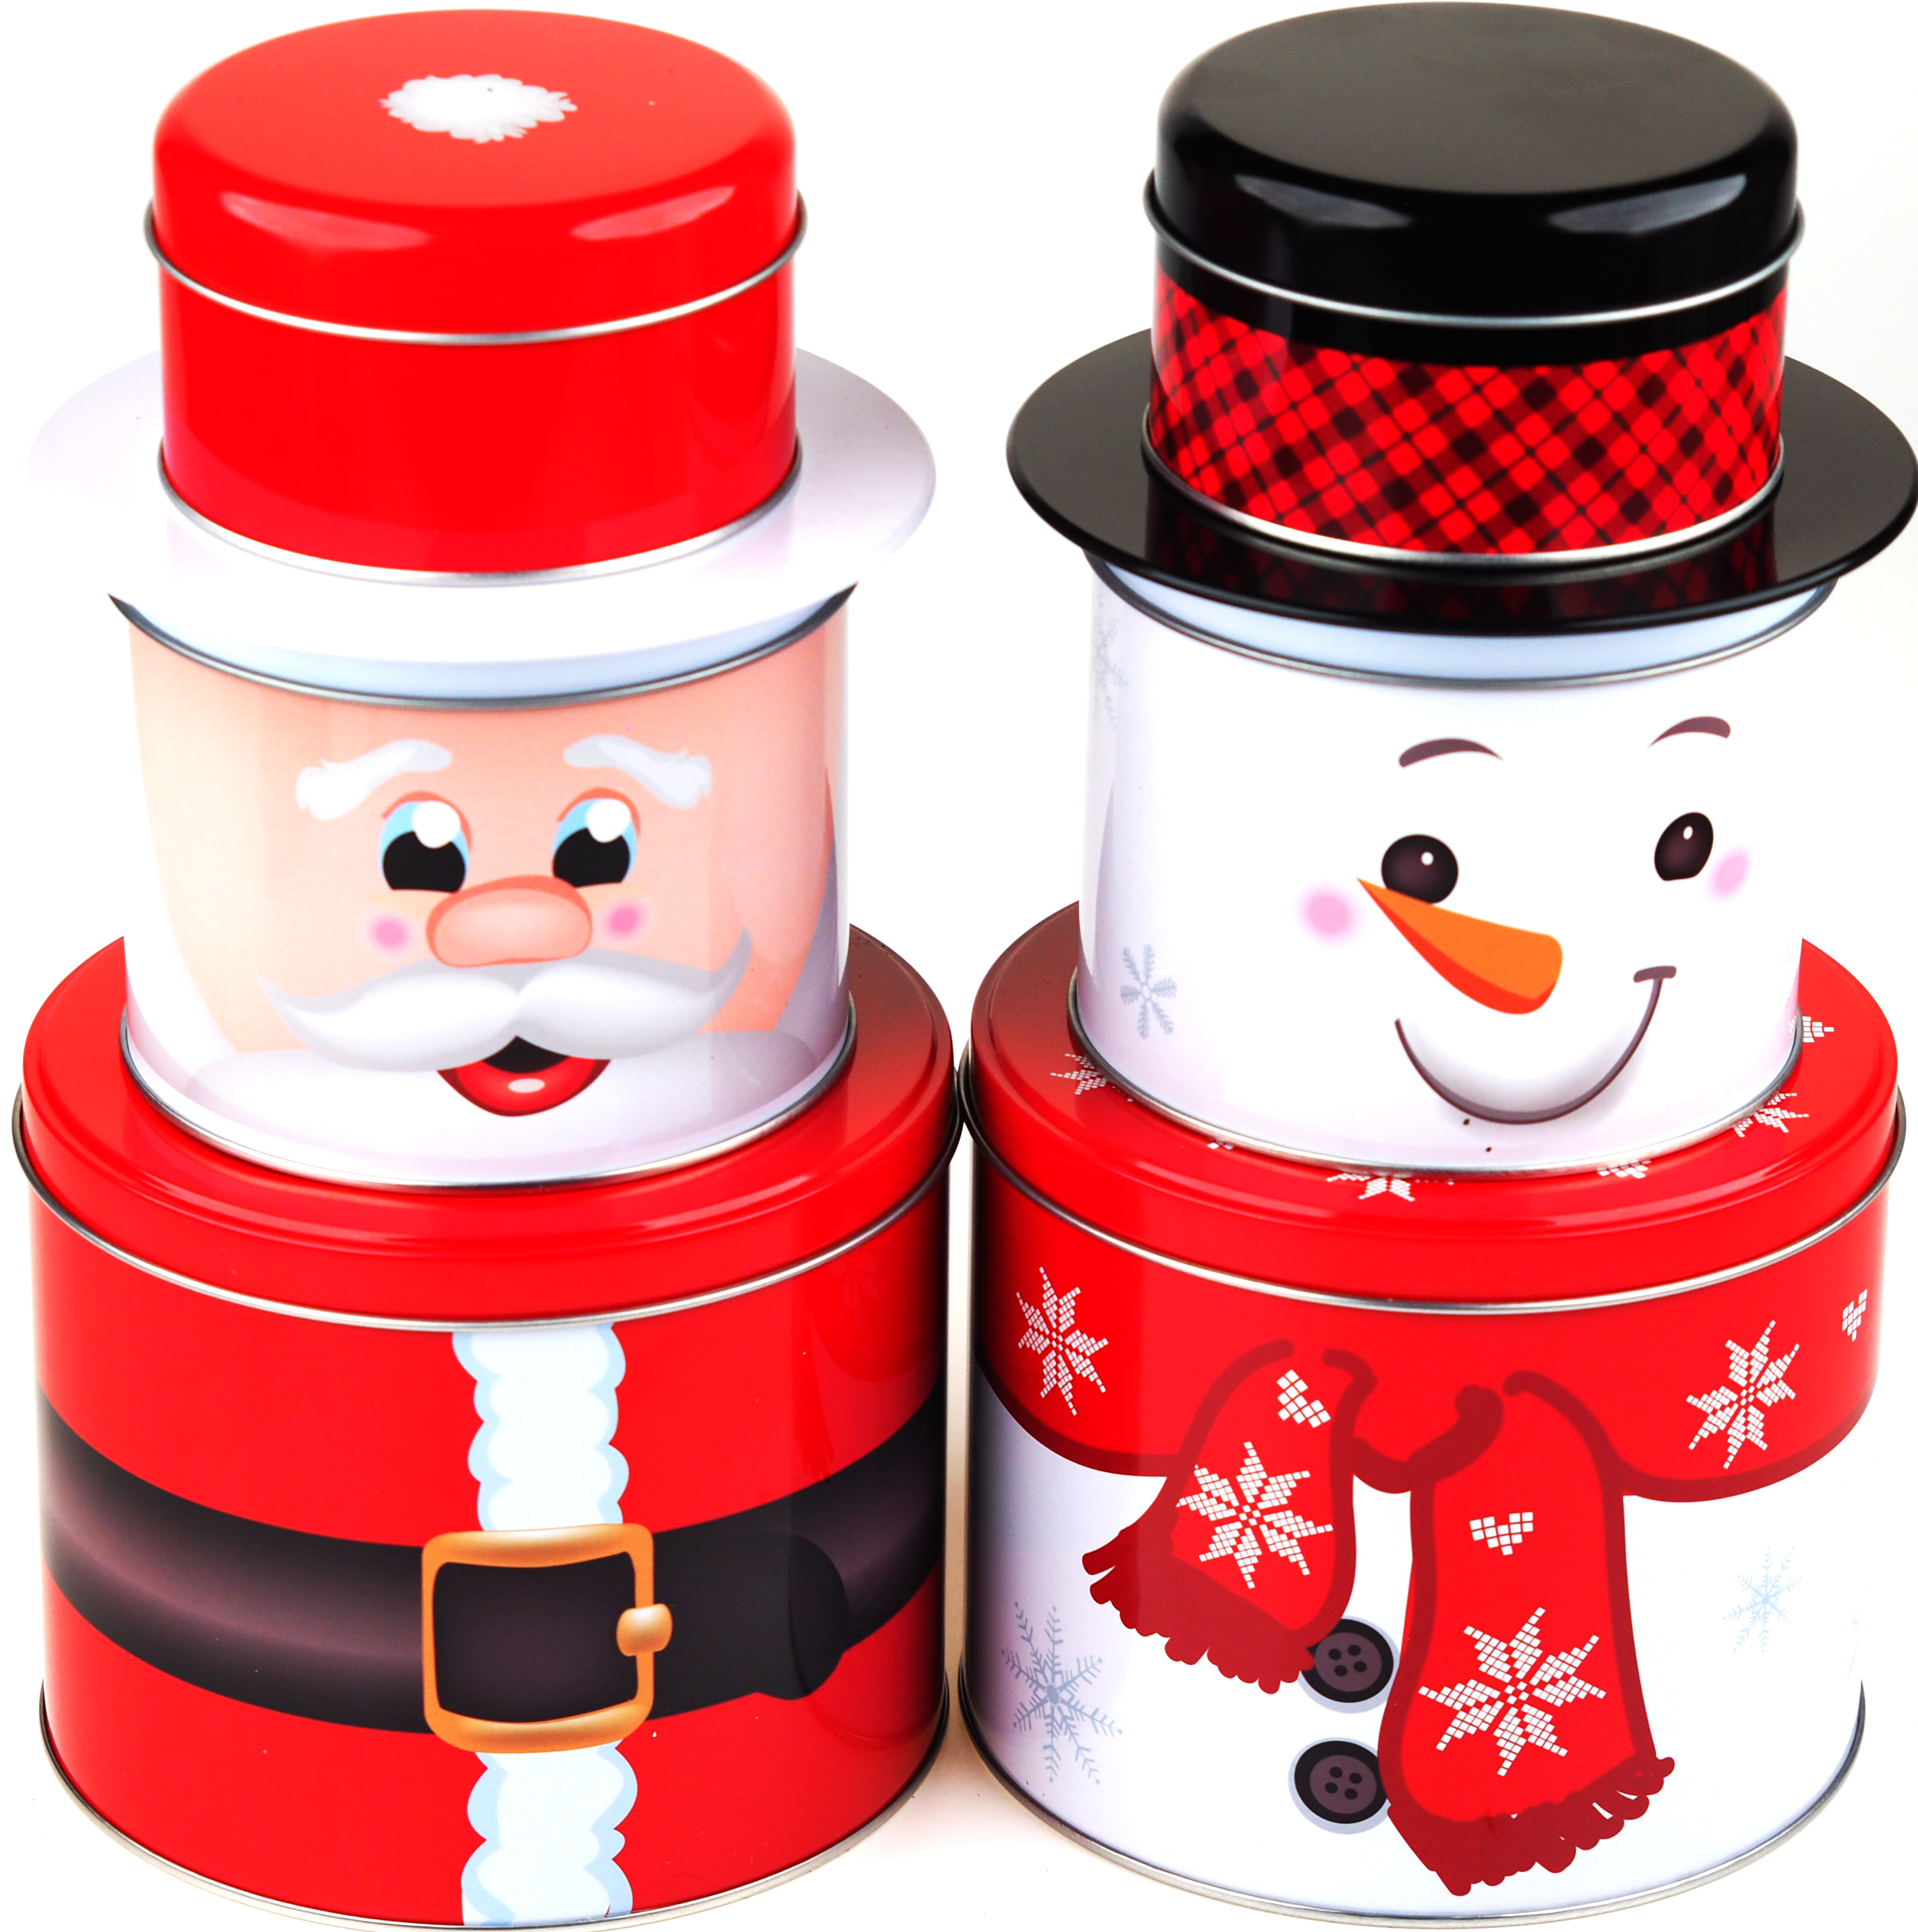 Set Of 3 Christmas Stacking Food Tins - Storage containers - Snowman Santa